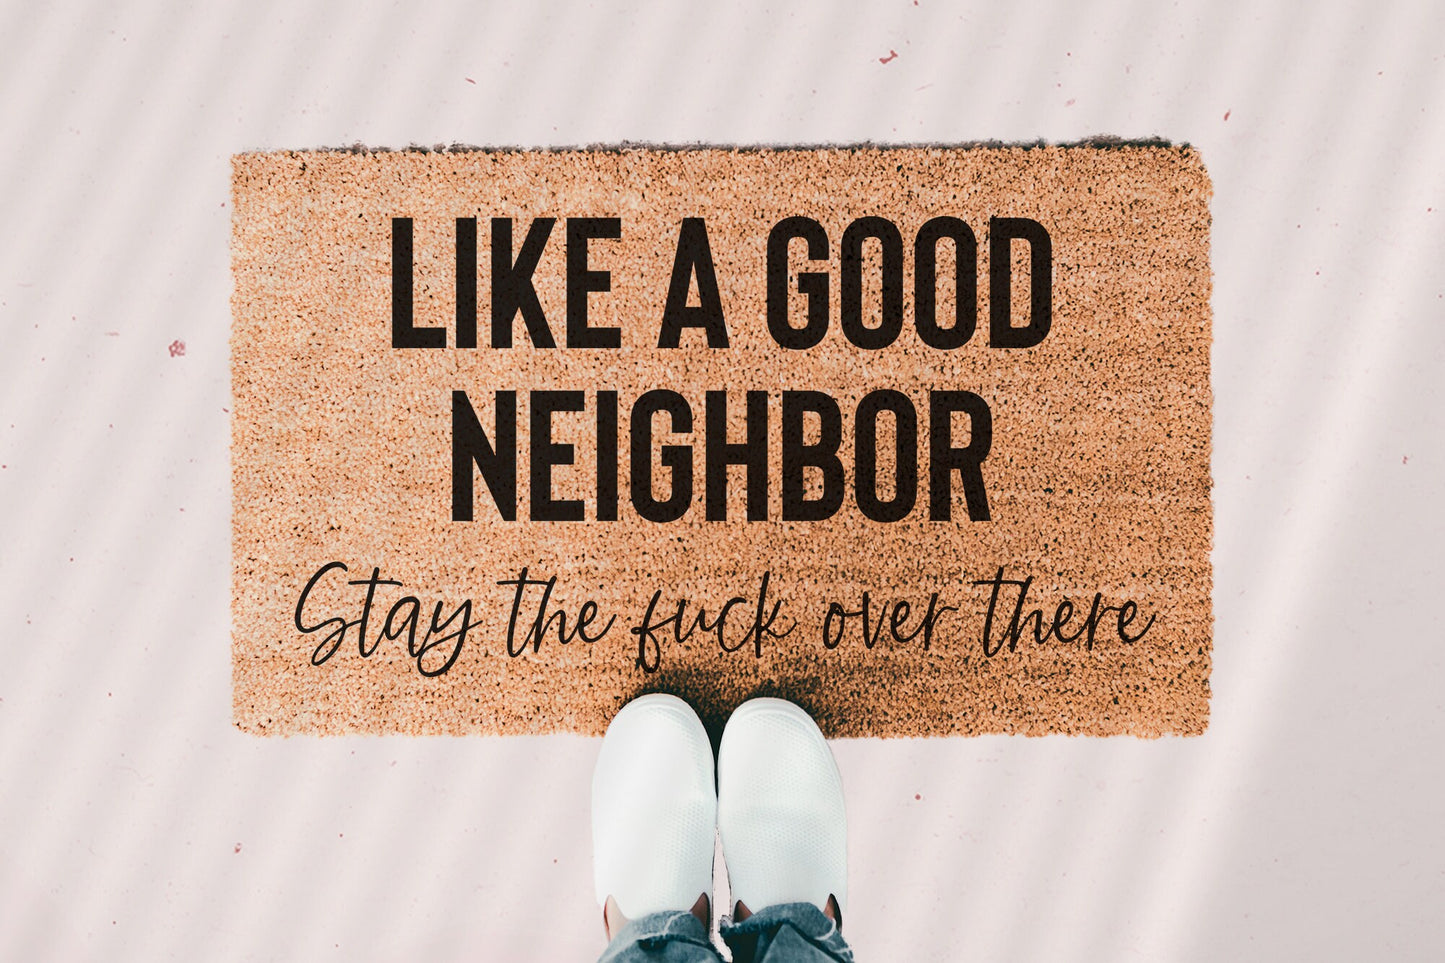 Like a Good Neighbor Stay Over There Doormat